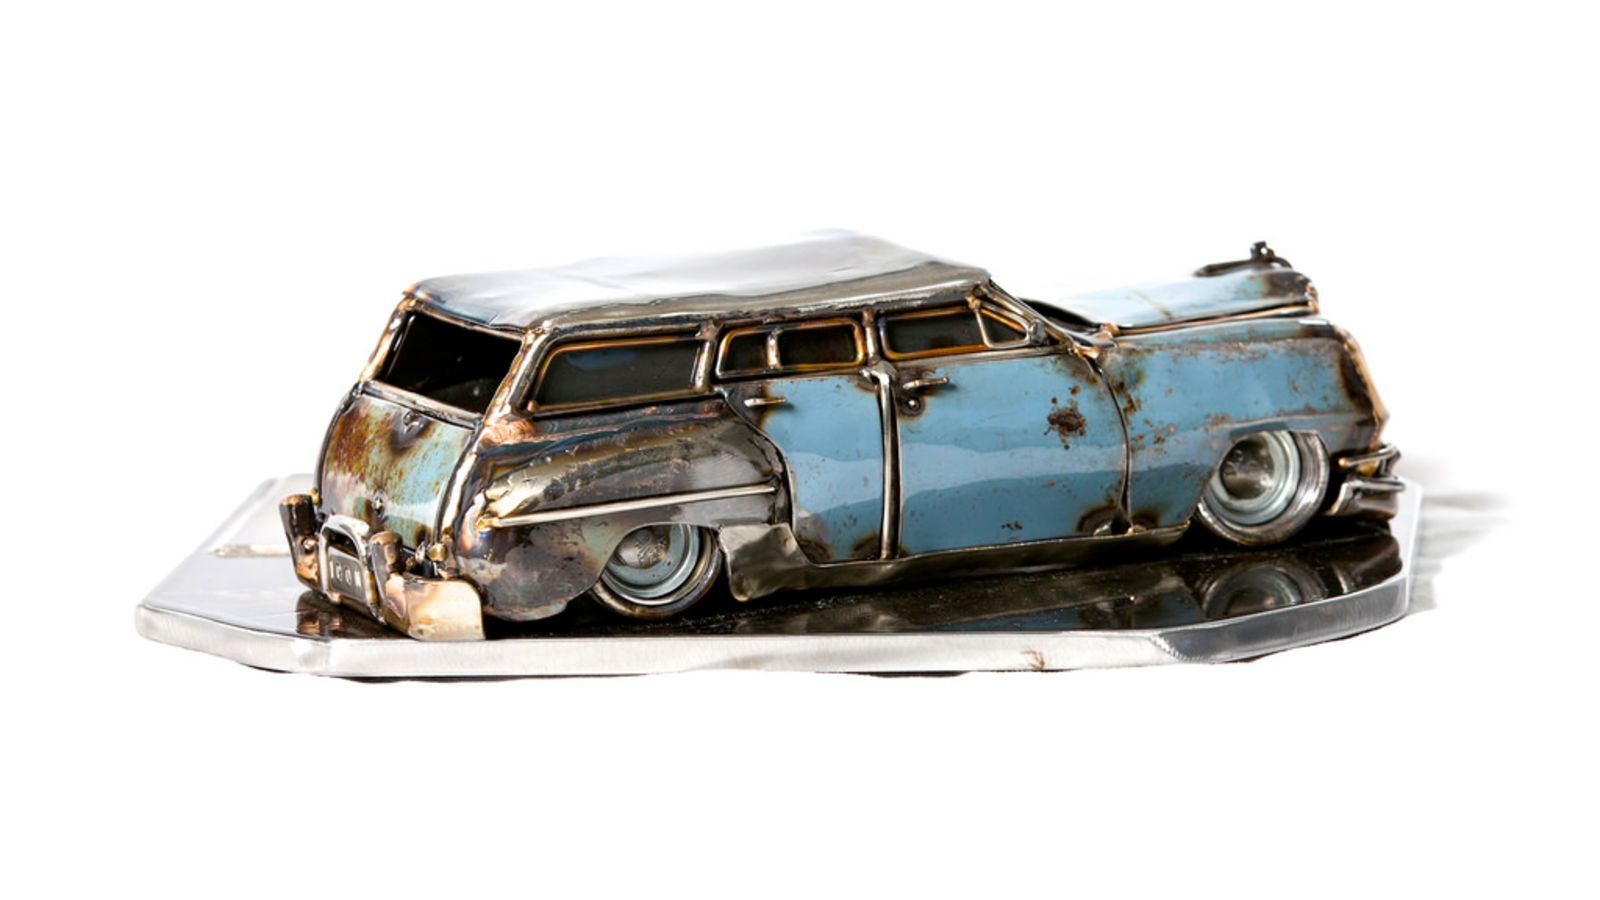 Illustration for article titled 1950 GMC COE sculpture...